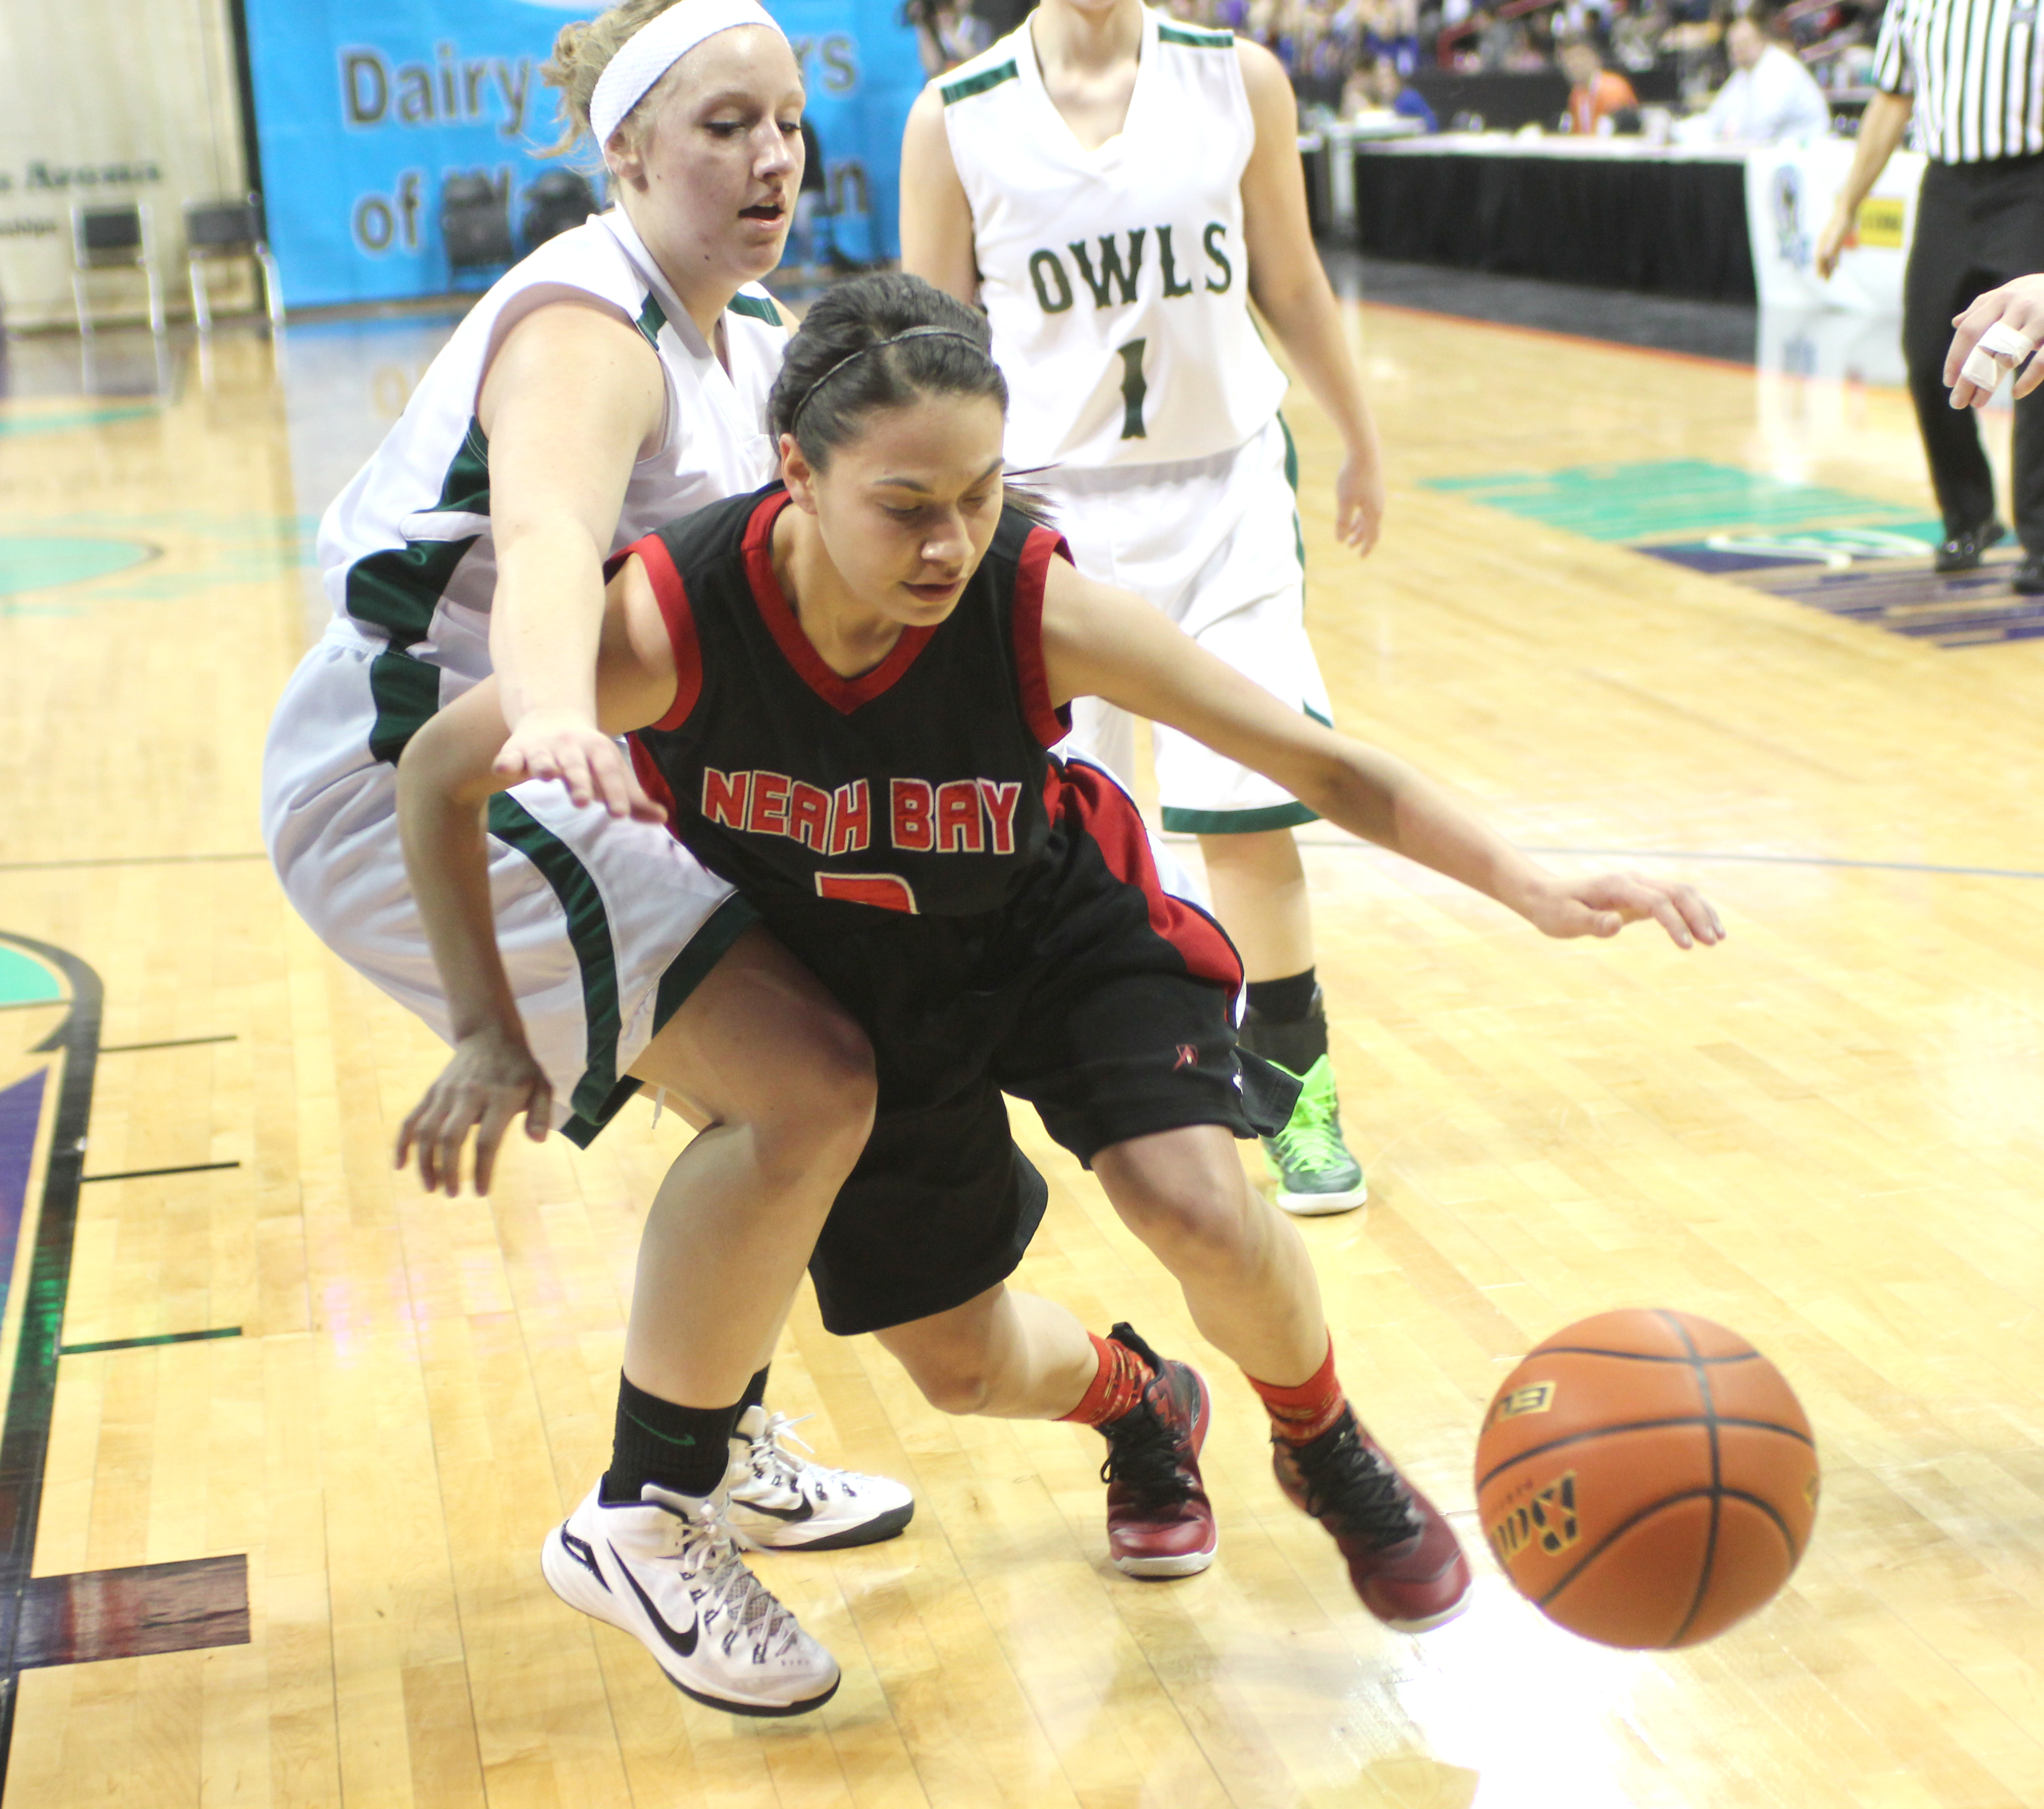 Meah Bay senior Hailey Greene drives past Mary M. Knight's Lauren Dierkop during the opening round of the state tournament. (Roger Harnack/The Omak-Okanogan County Chronicle)